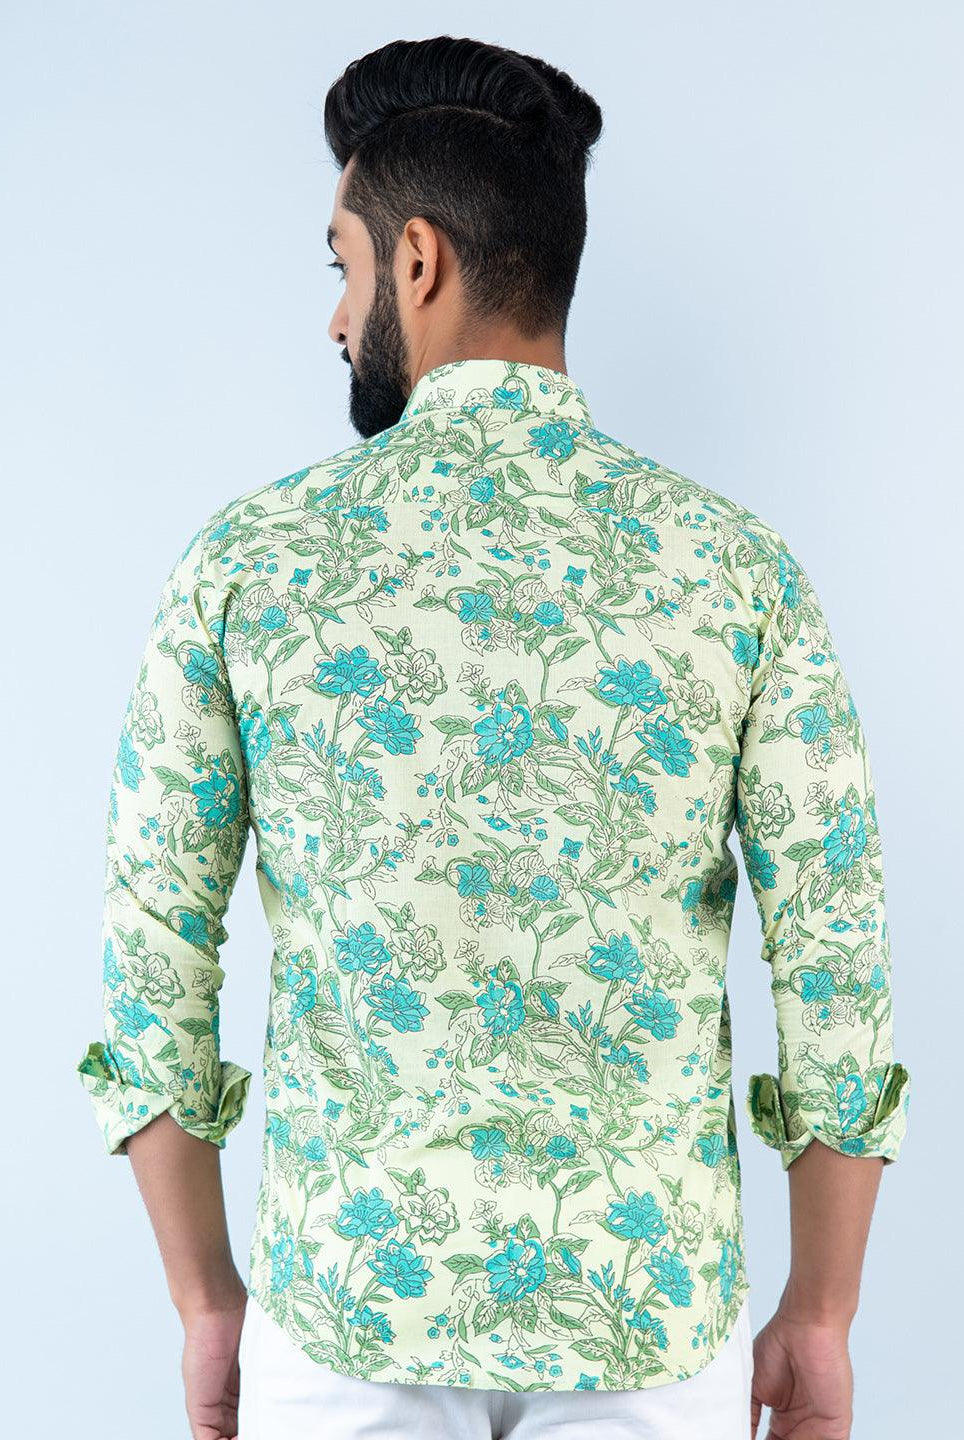 floral printed shirts for men